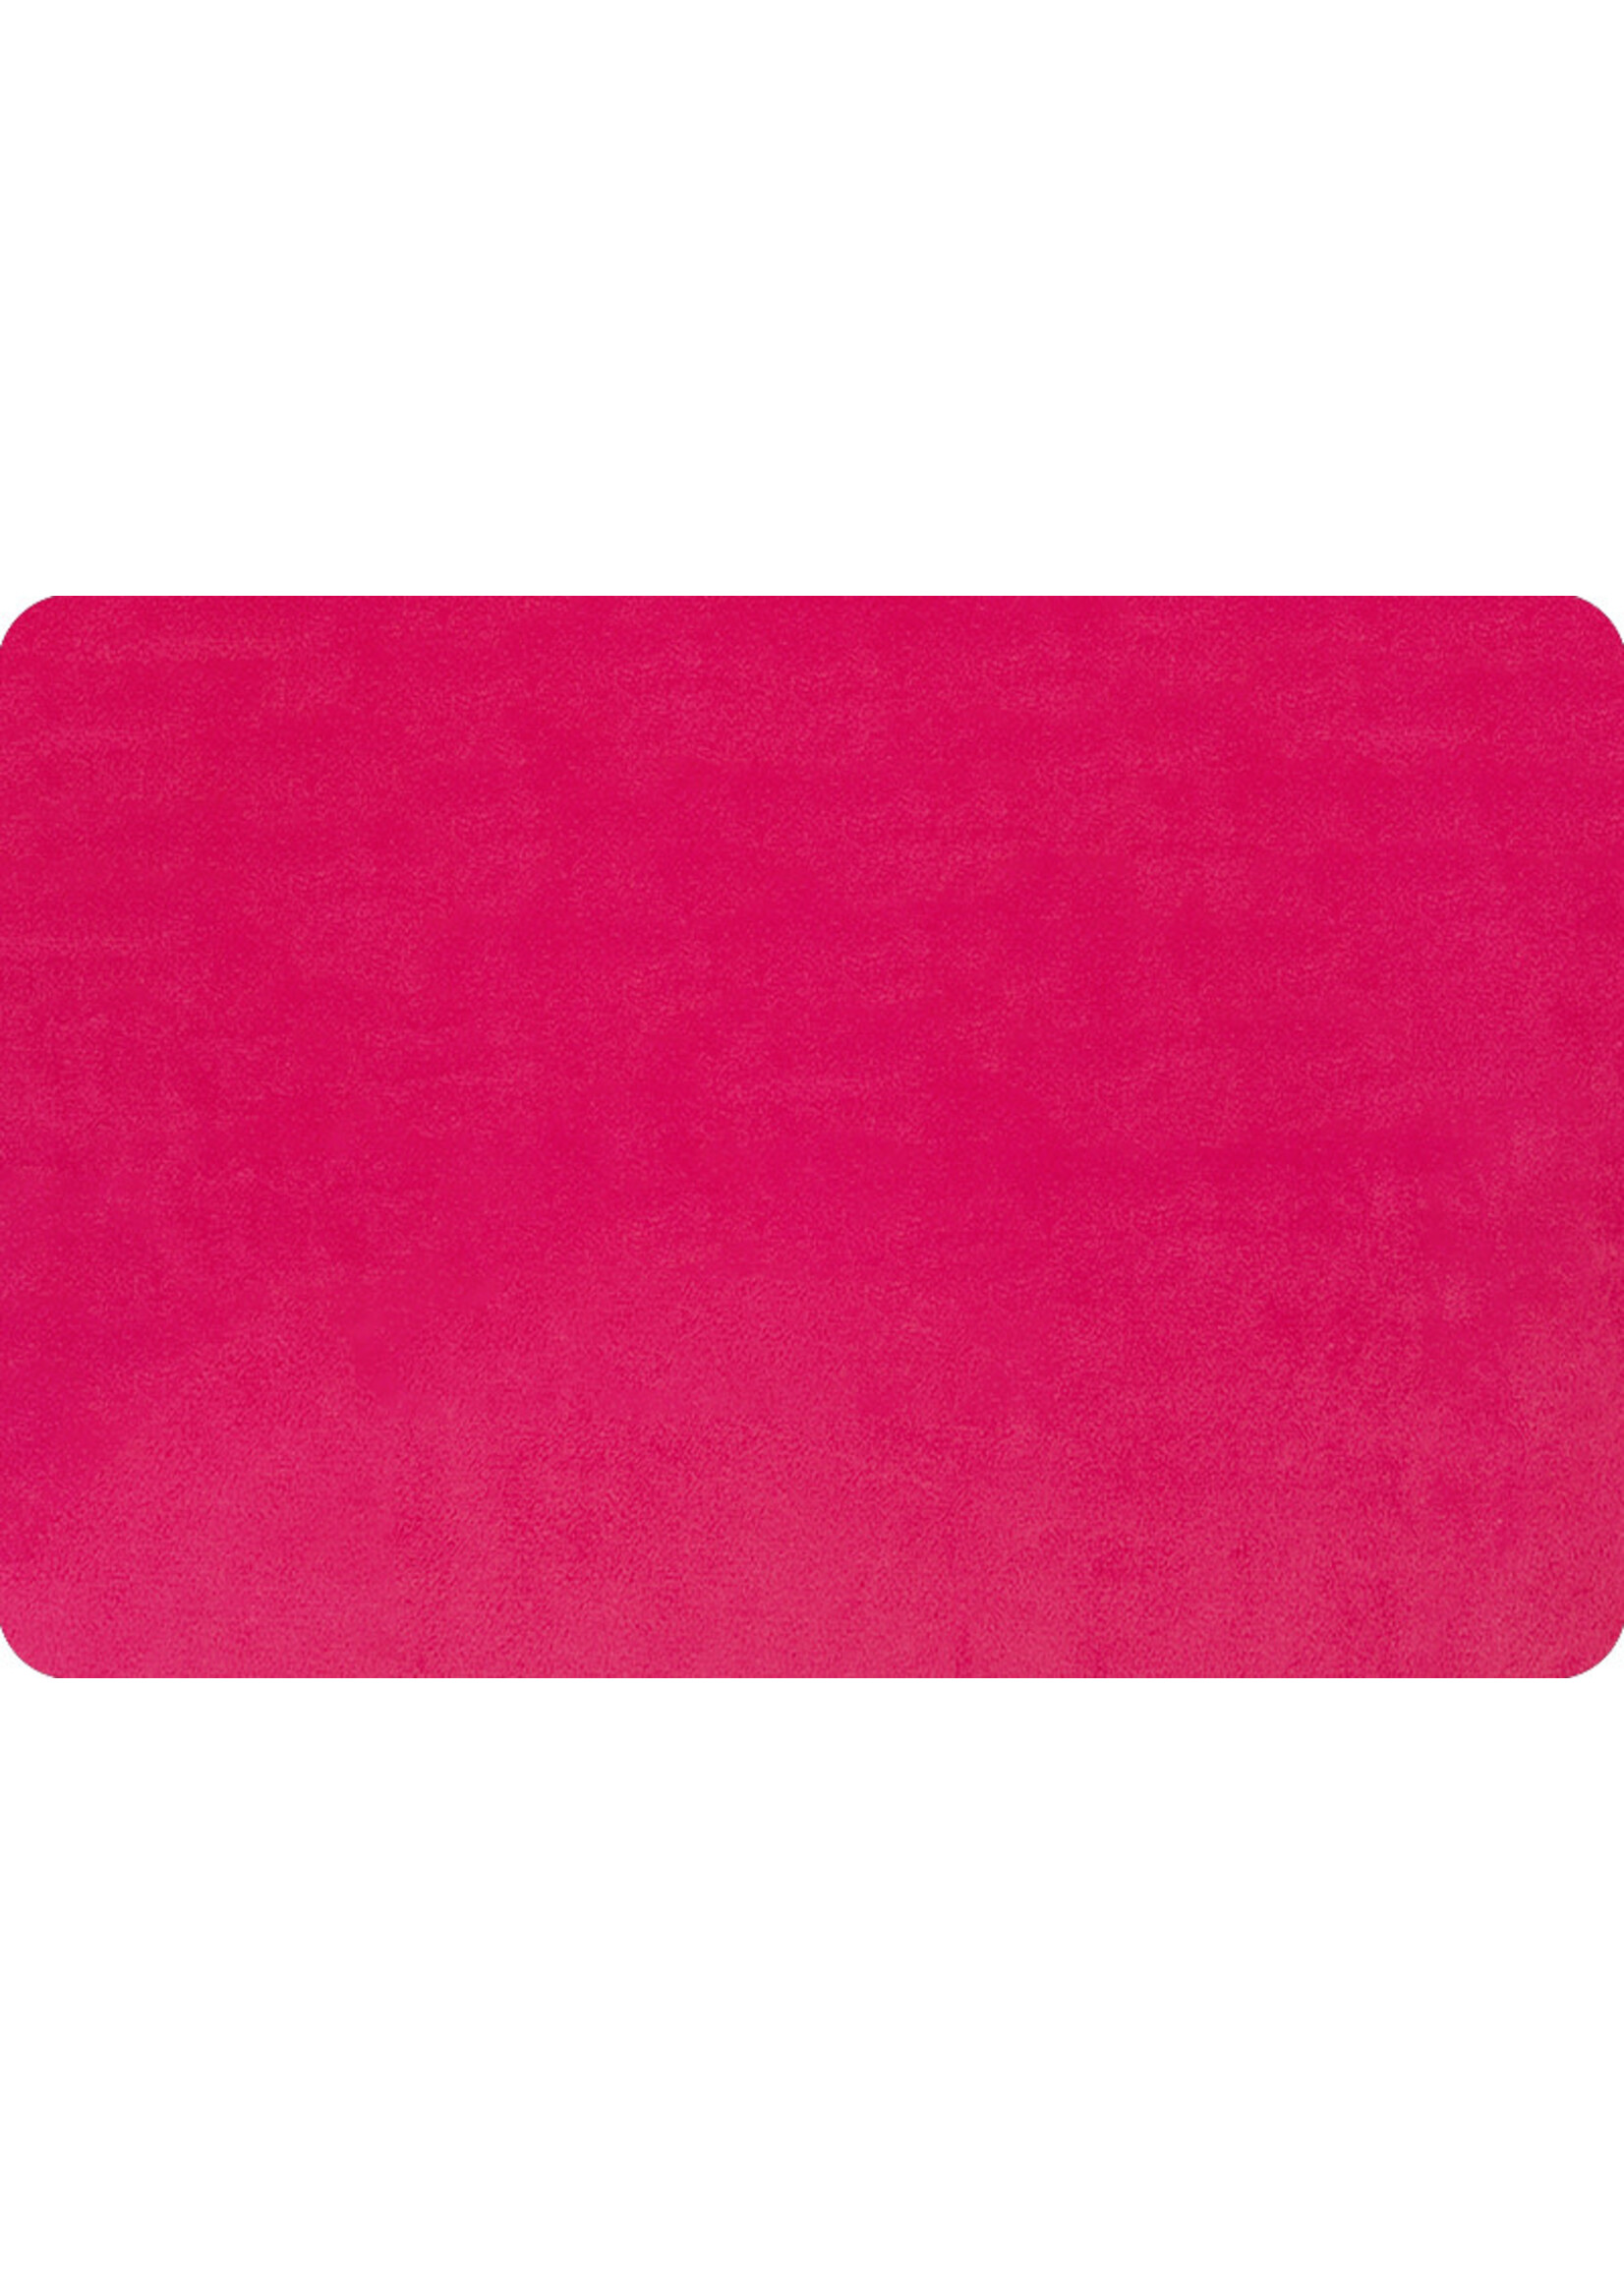 Shannon Fabrics Minky, Extra Wide Solid Cuddle3, 90" Fuchsia, (by the inch)